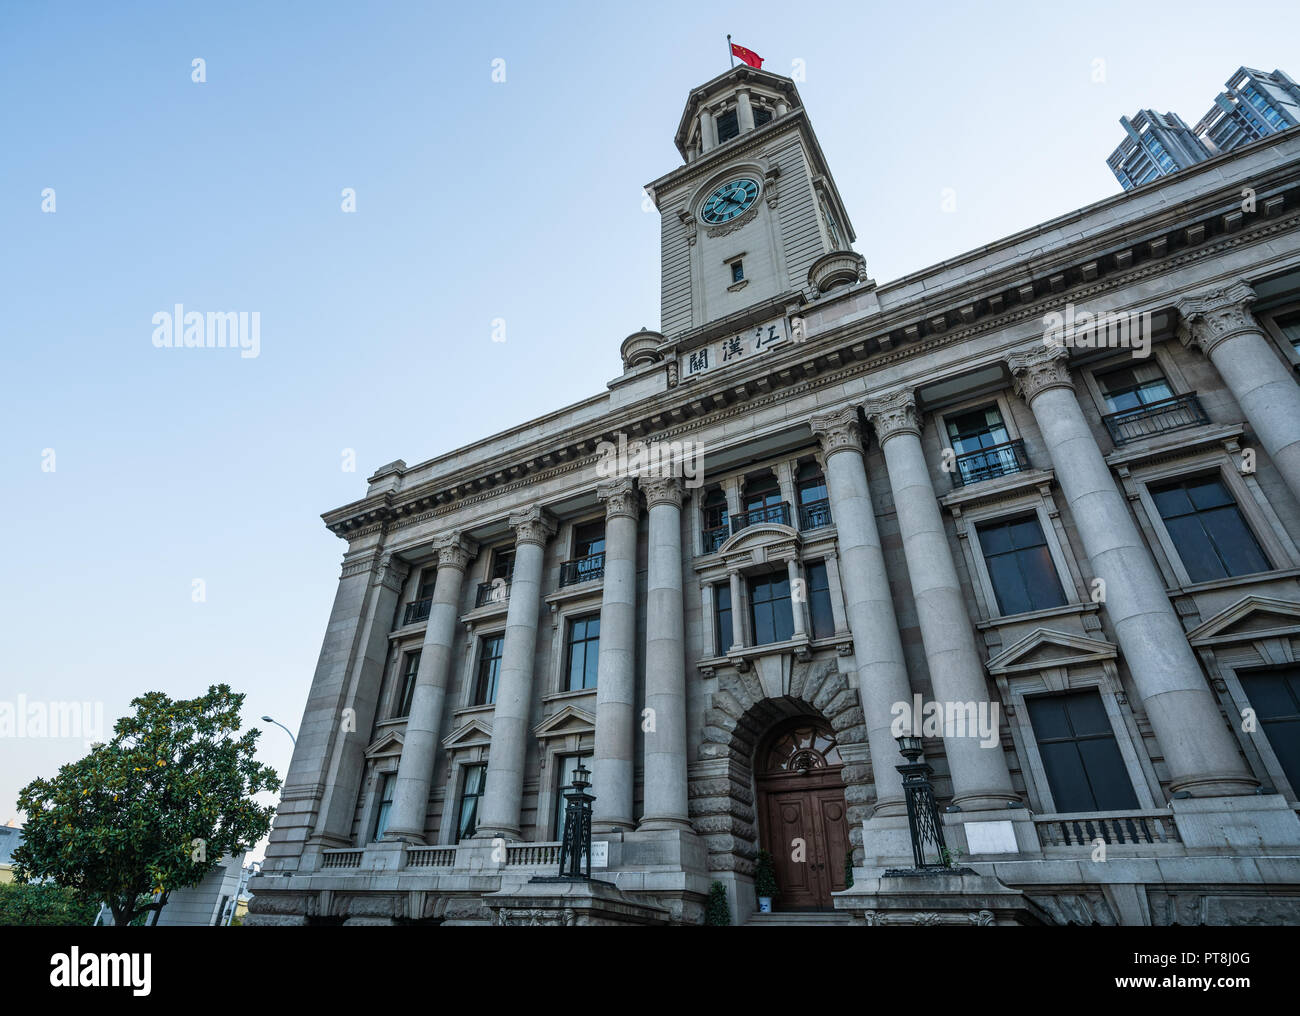 Facade of former Hankou customs house Jianghan historical building in Wuhan China now turned into a museum Stock Photo